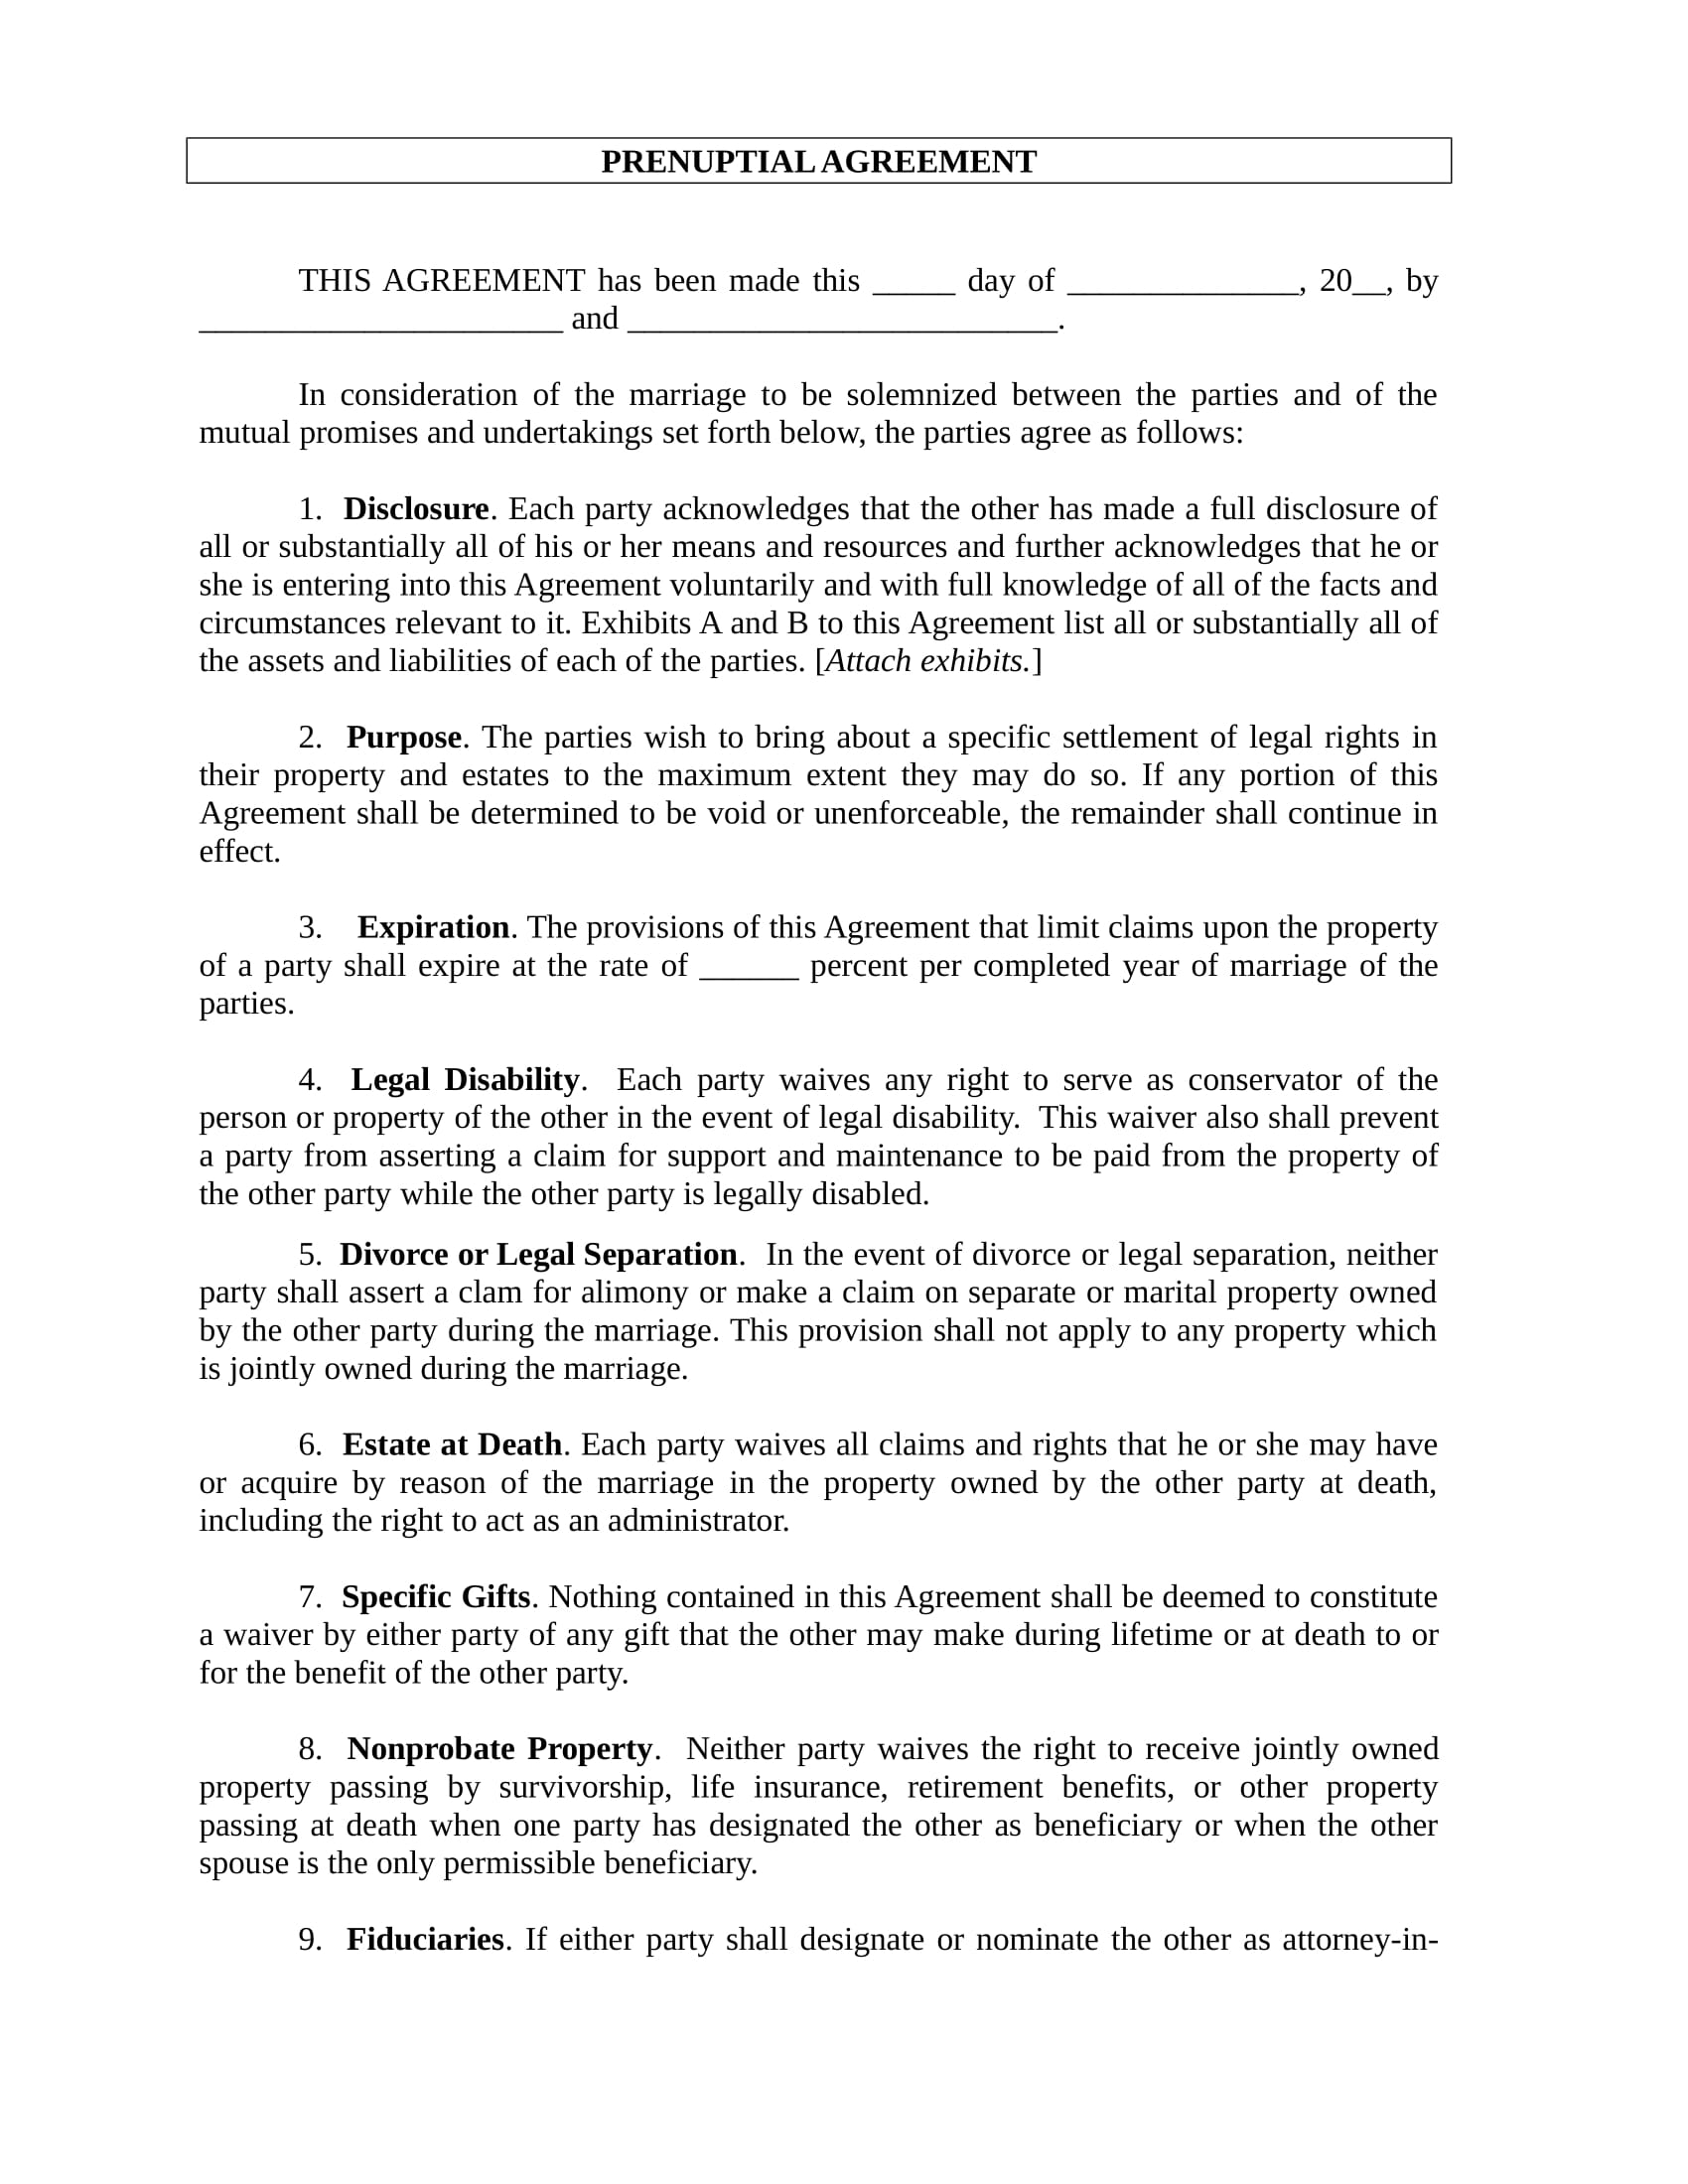 prenuptial agreement contract form in doc 1